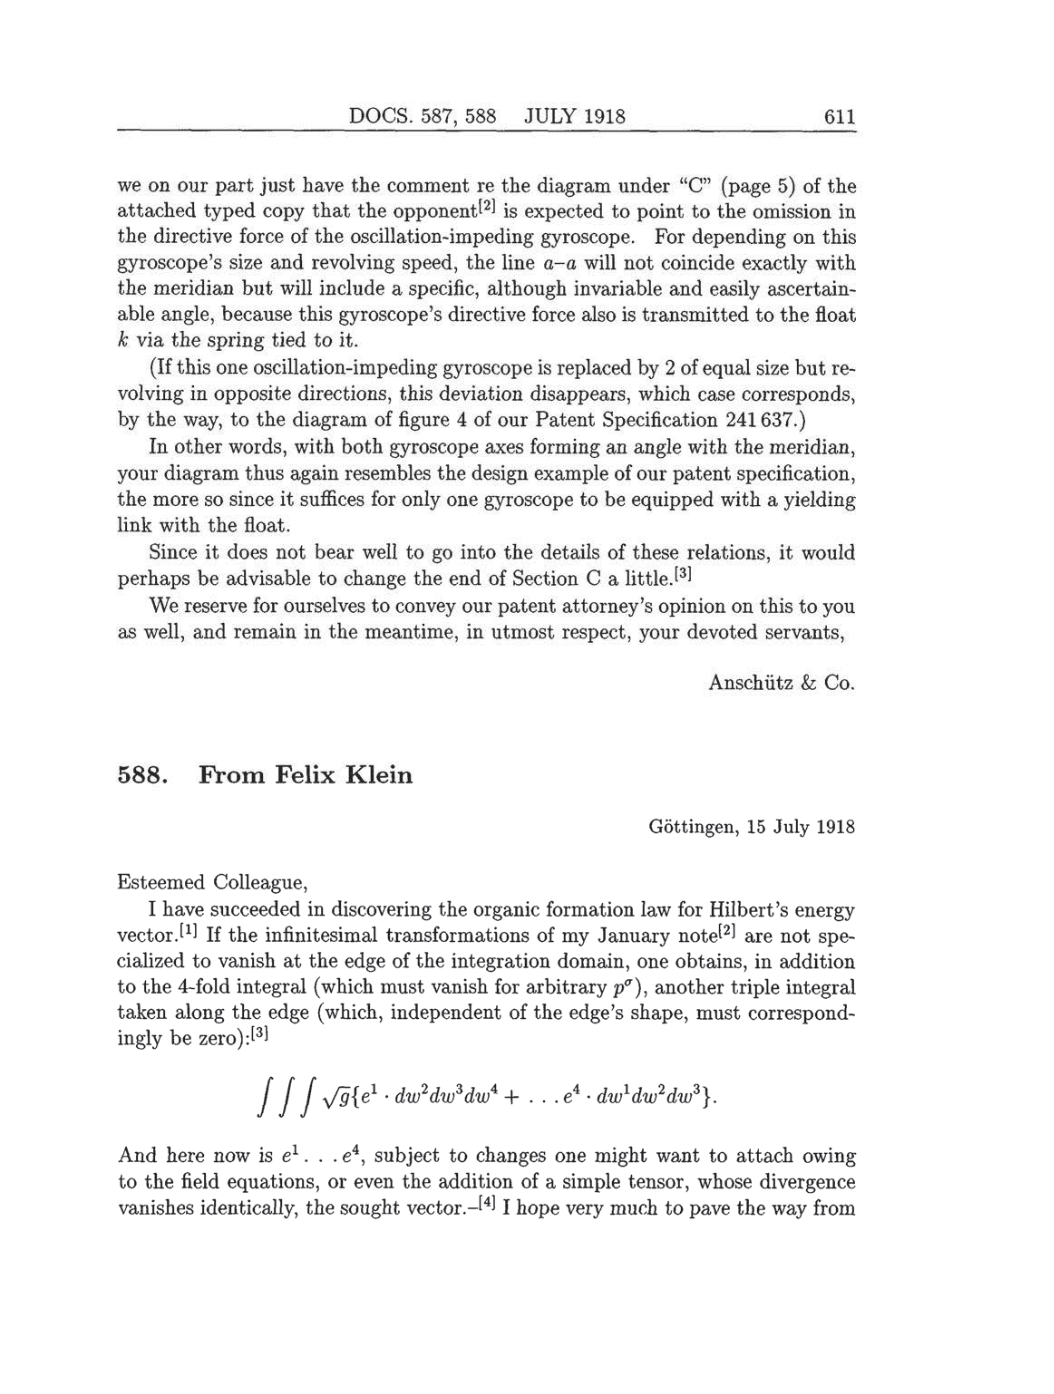 Volume 8: The Berlin Years: Correspondence, 1914-1918 (English translation supplement) page 611